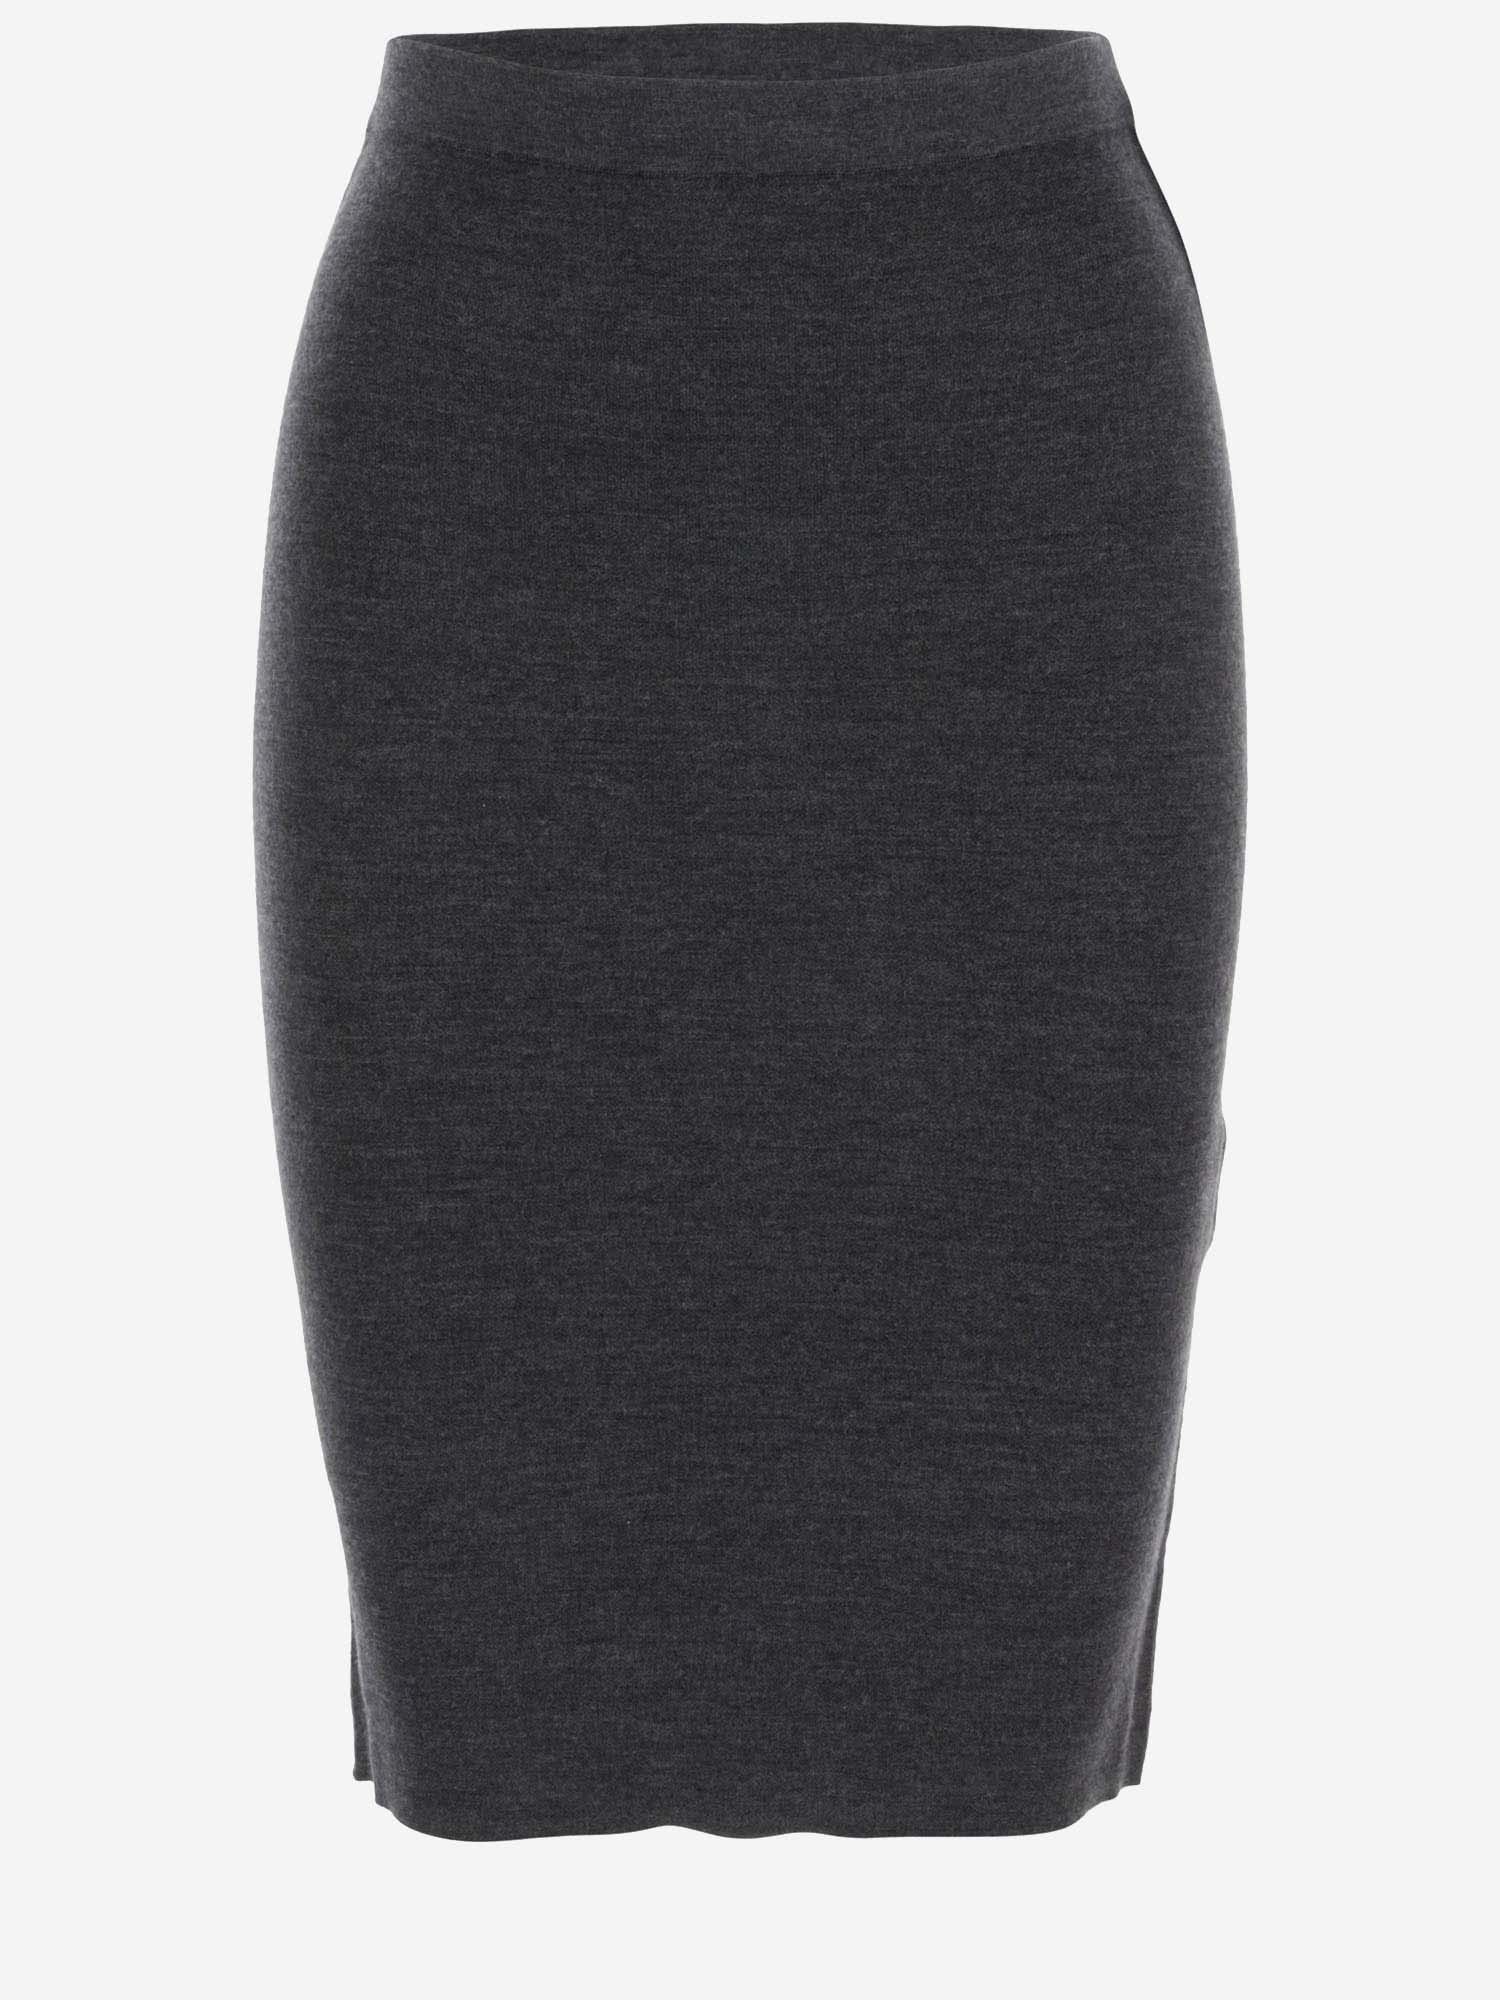 Saint Laurent Cashmere Wool And Silk Pencil Skirt In Black